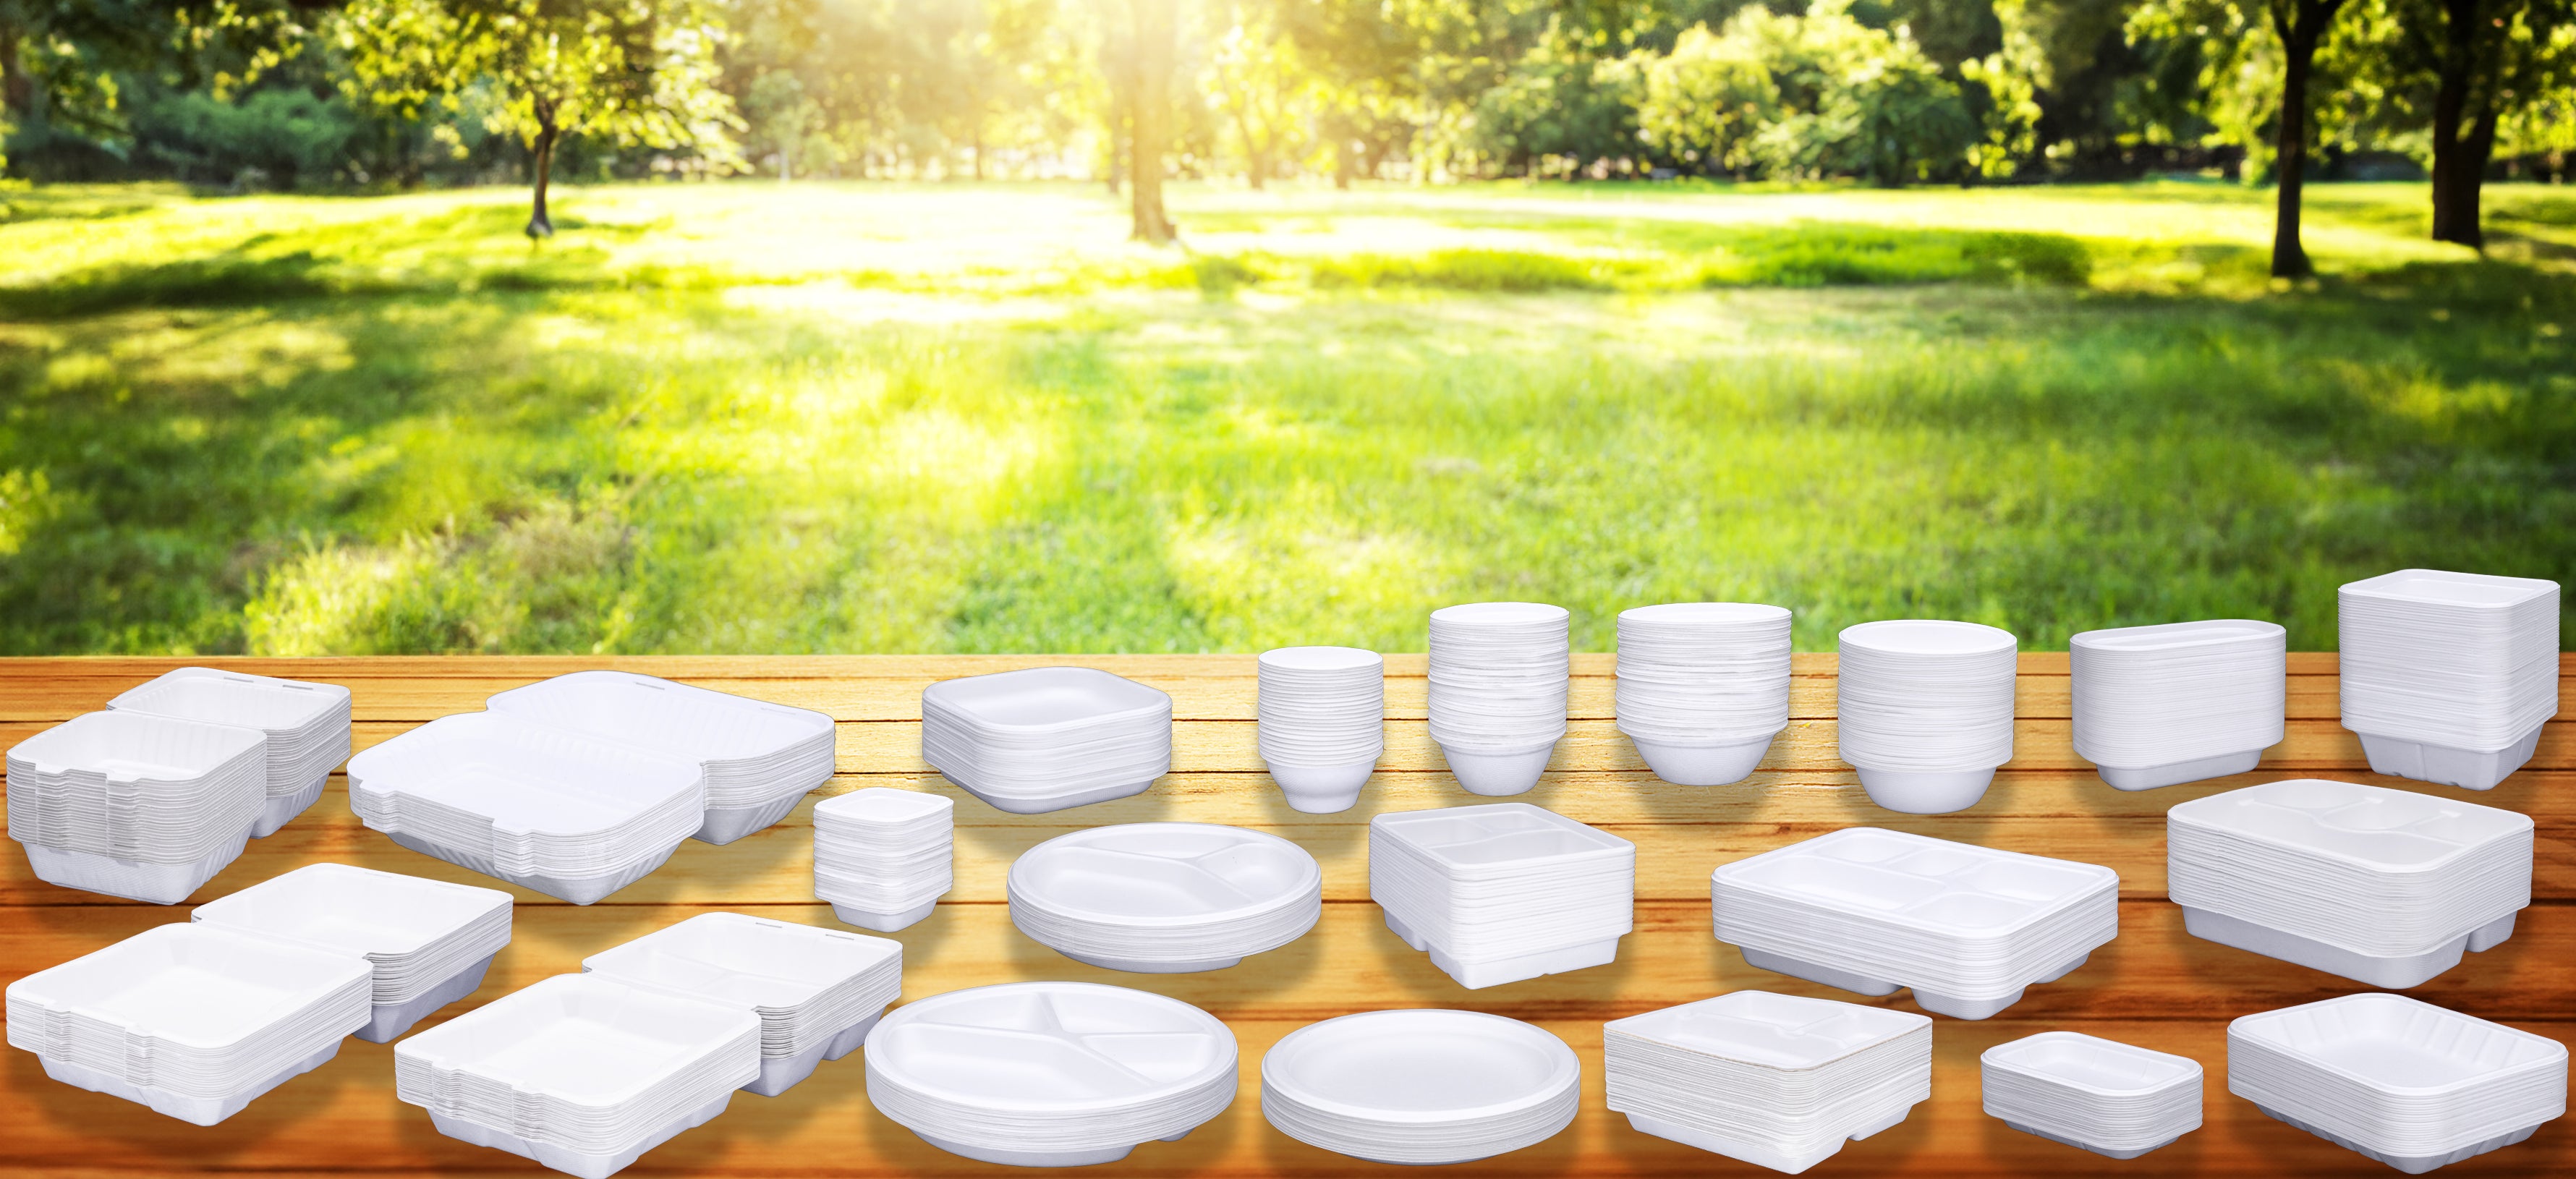 Biodegradable-and-compostable-tableware-Biocare